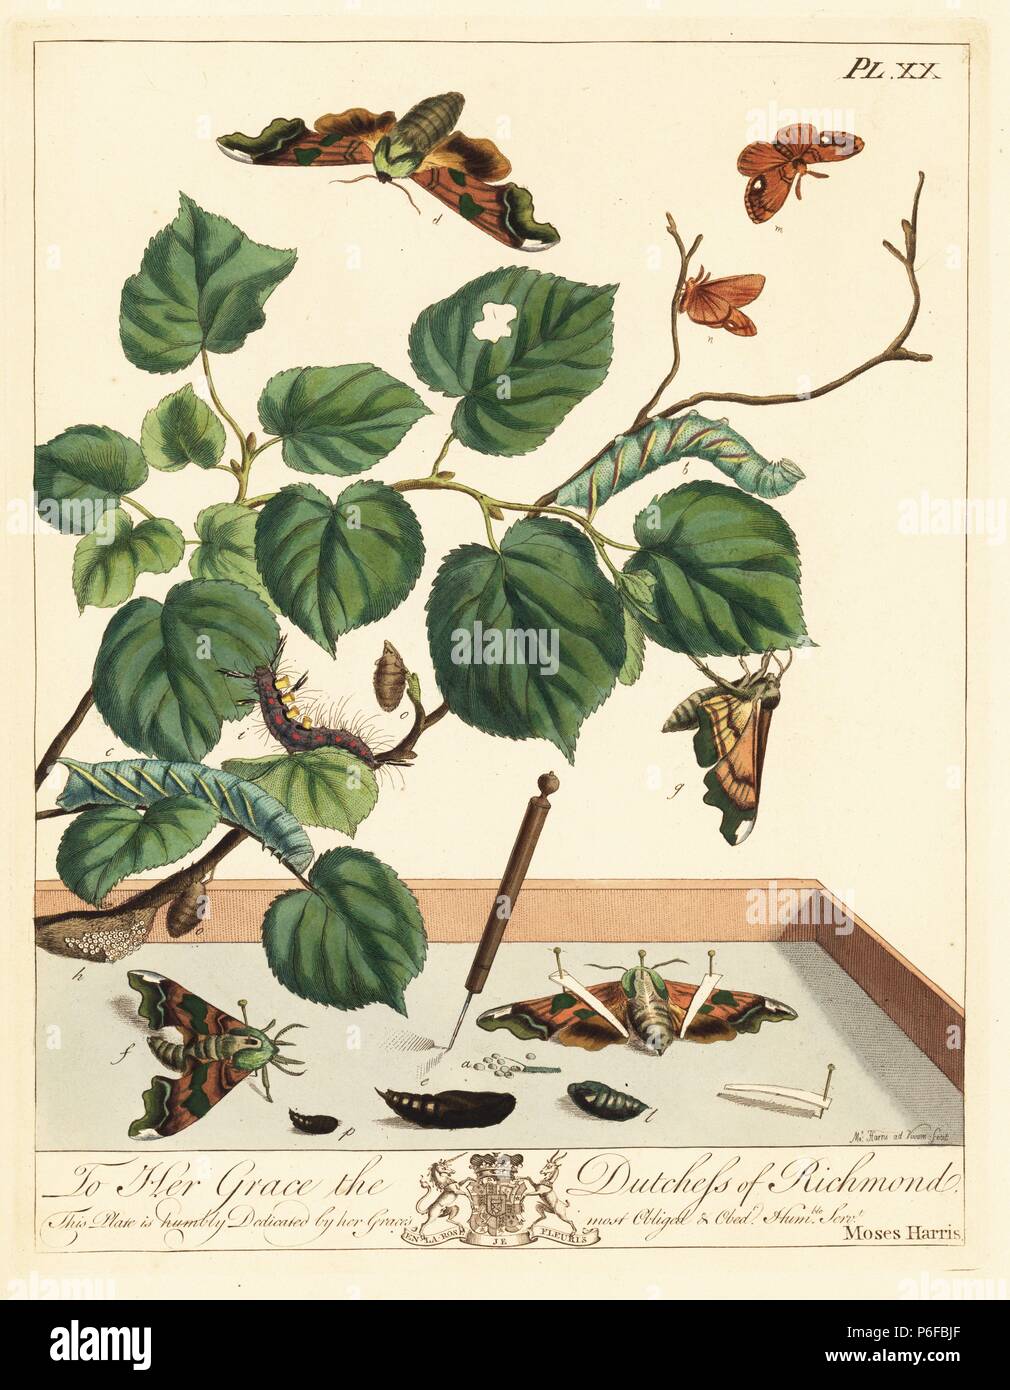 Lime hawk-moth, Mimas tillae, and common vapourer moth or rusty tussock, Orgyia antiqua, on lime leaves, Tillia europaea. Handcoloured lithograph after an illustration by Moses Harris from 'The Aurelian; a Natural History of English Moths and Butterflies,' new edition edited by J. O. Westwood, published by Henry Bohn, London, 1840. Stock Photo